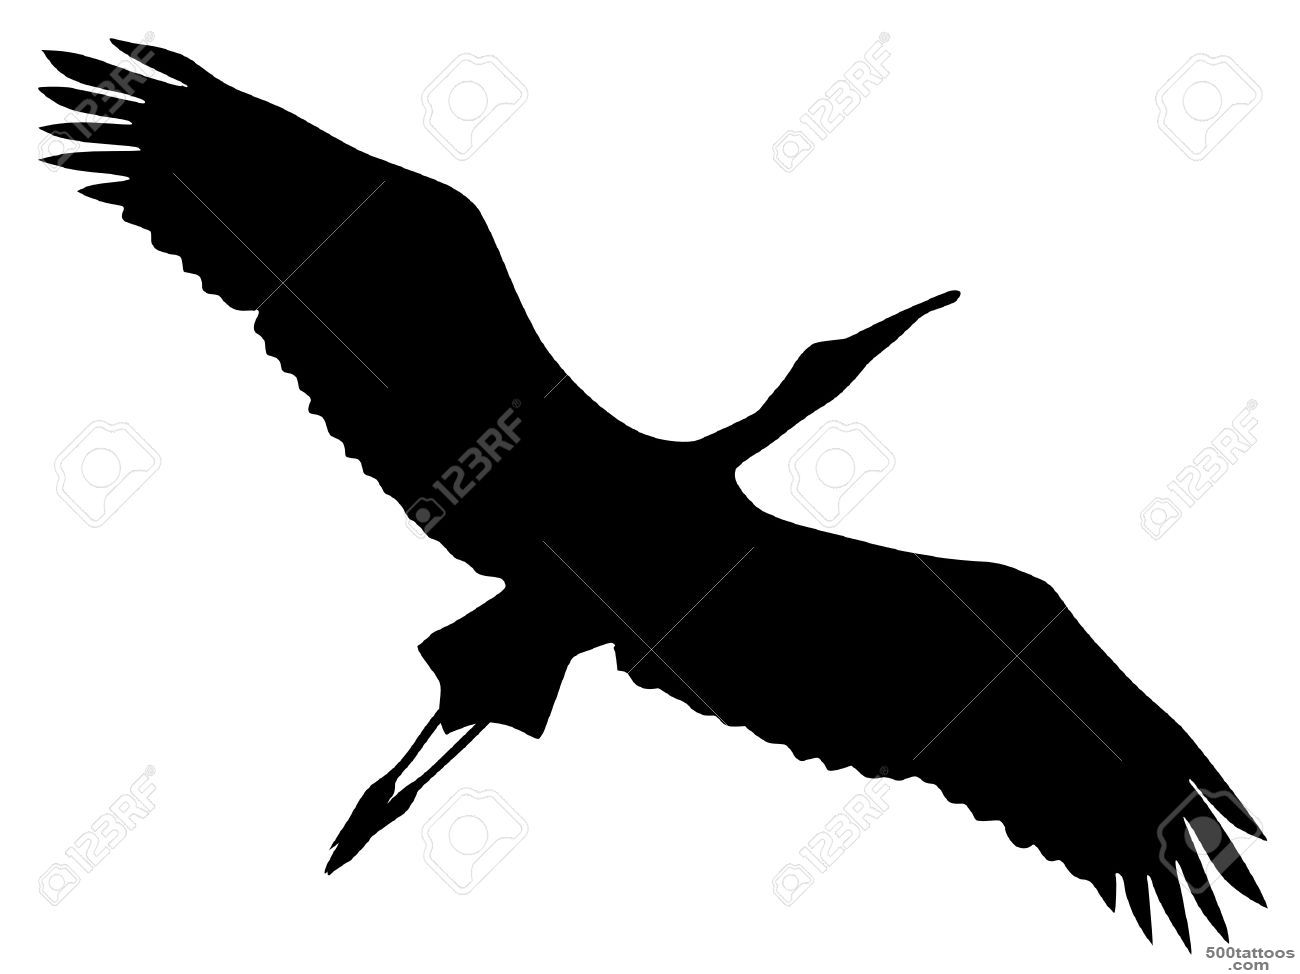 Illustration In Style Of Black Silhouette Of Stork Royalty Free ..._23